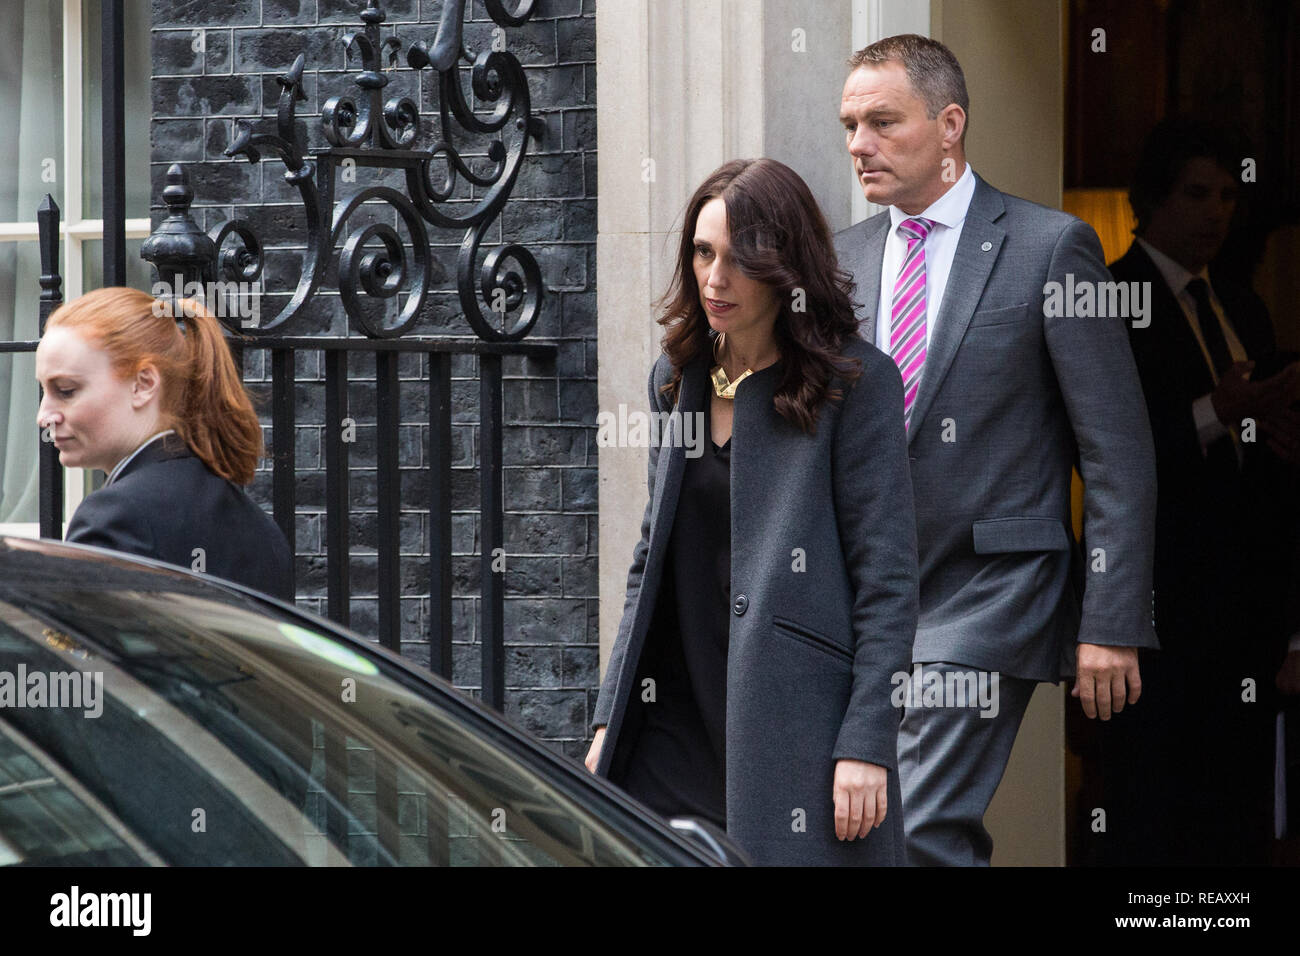 London, UK. 21st January, 2019. The Prime Minister of New Zealand Jacinda Ardern leaves 10 Downing Street following a meeting with Prime Minister Theresa May. Stock Photo